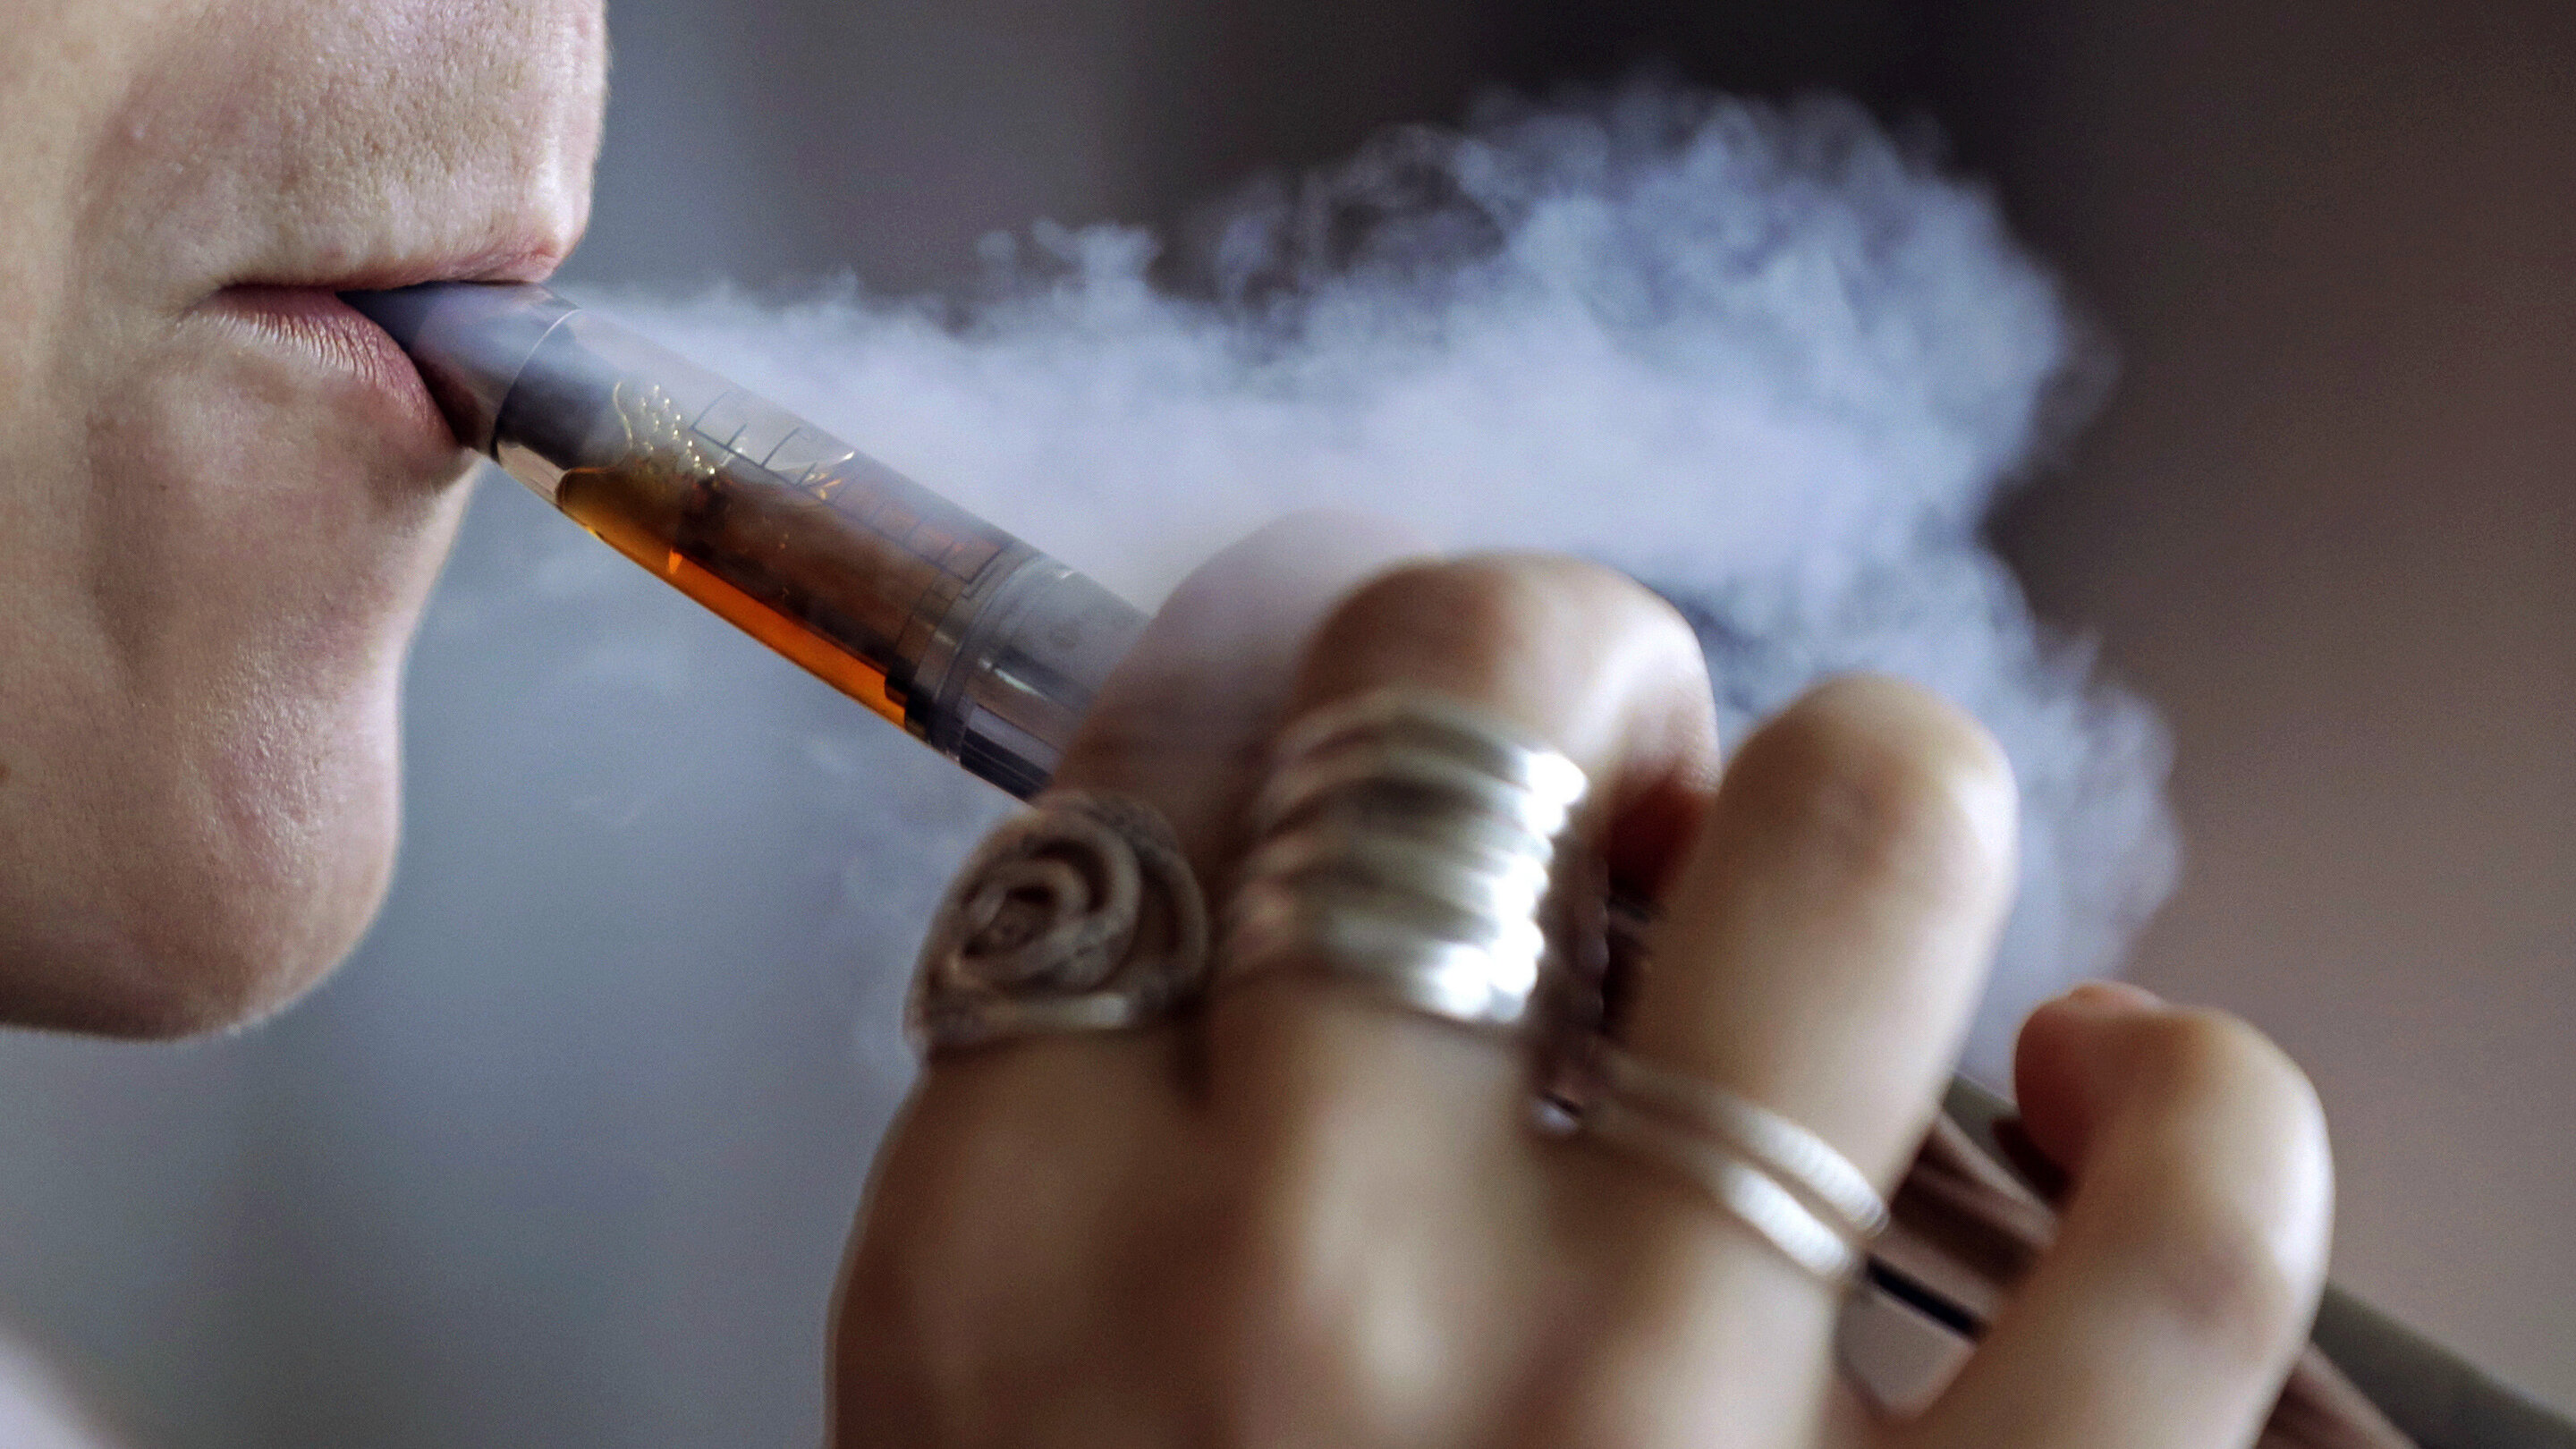 Massachusetts Oks Ban On Flavored Vaping Tobacco Products 